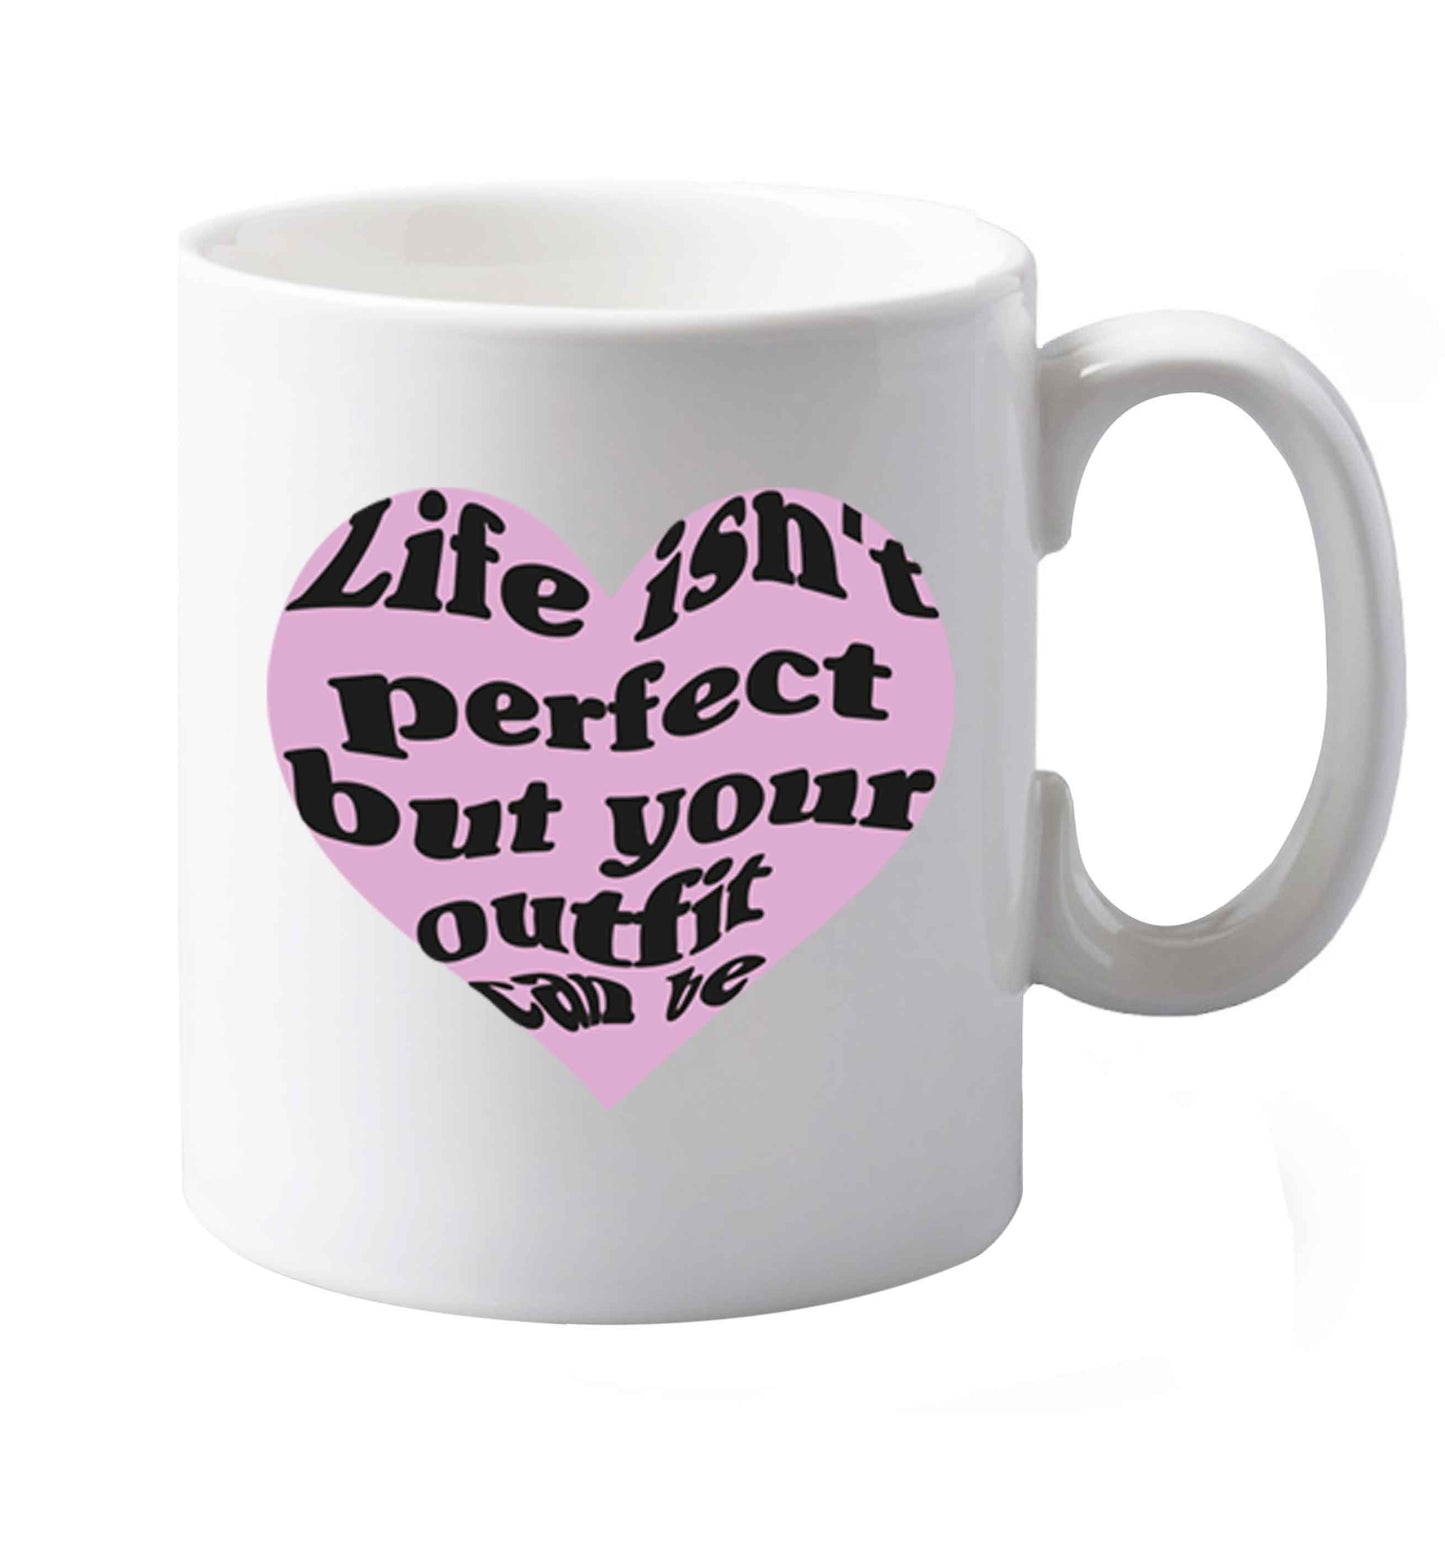 10 oz Life isn't perfect but your outfit can be  ceramic mug both sides